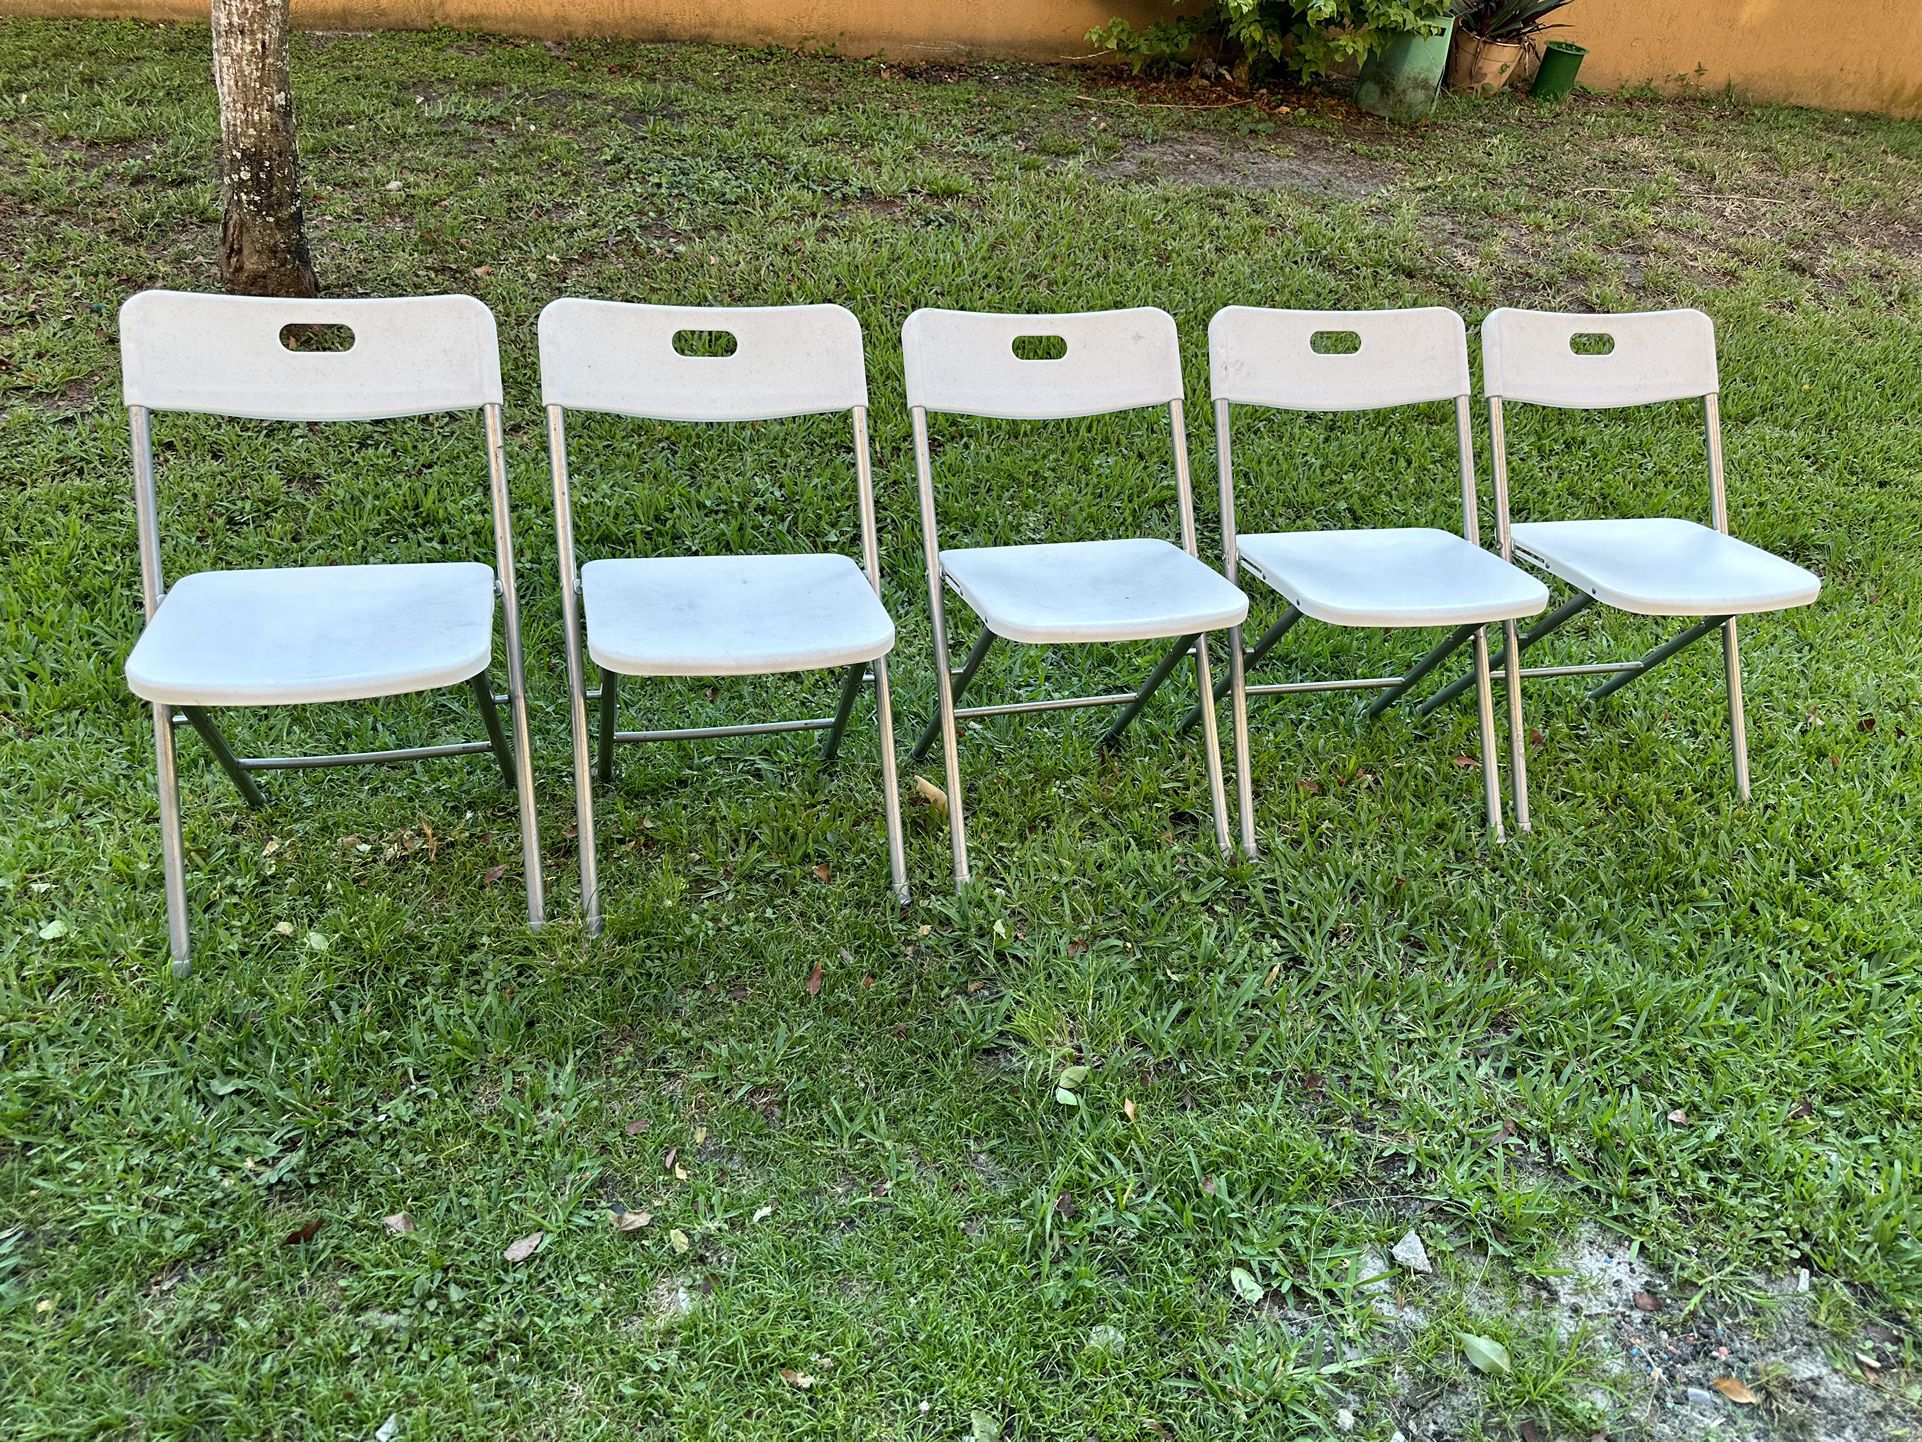 Five chairs